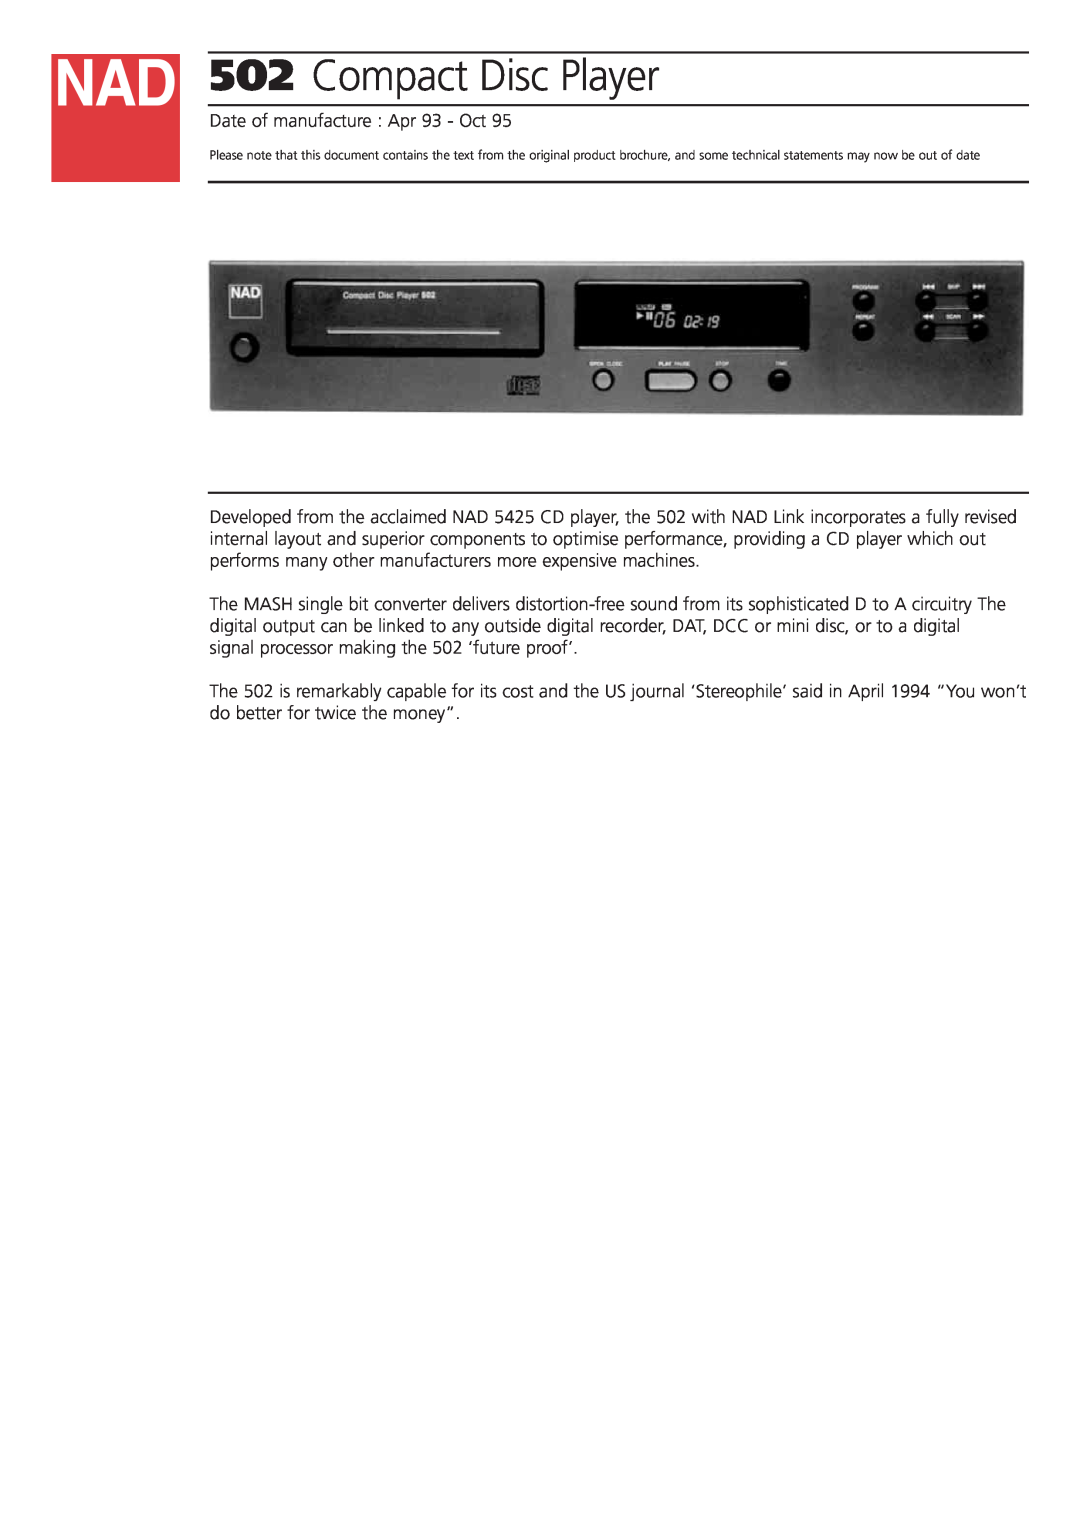 NAD brochure 502Compact Disc Player 